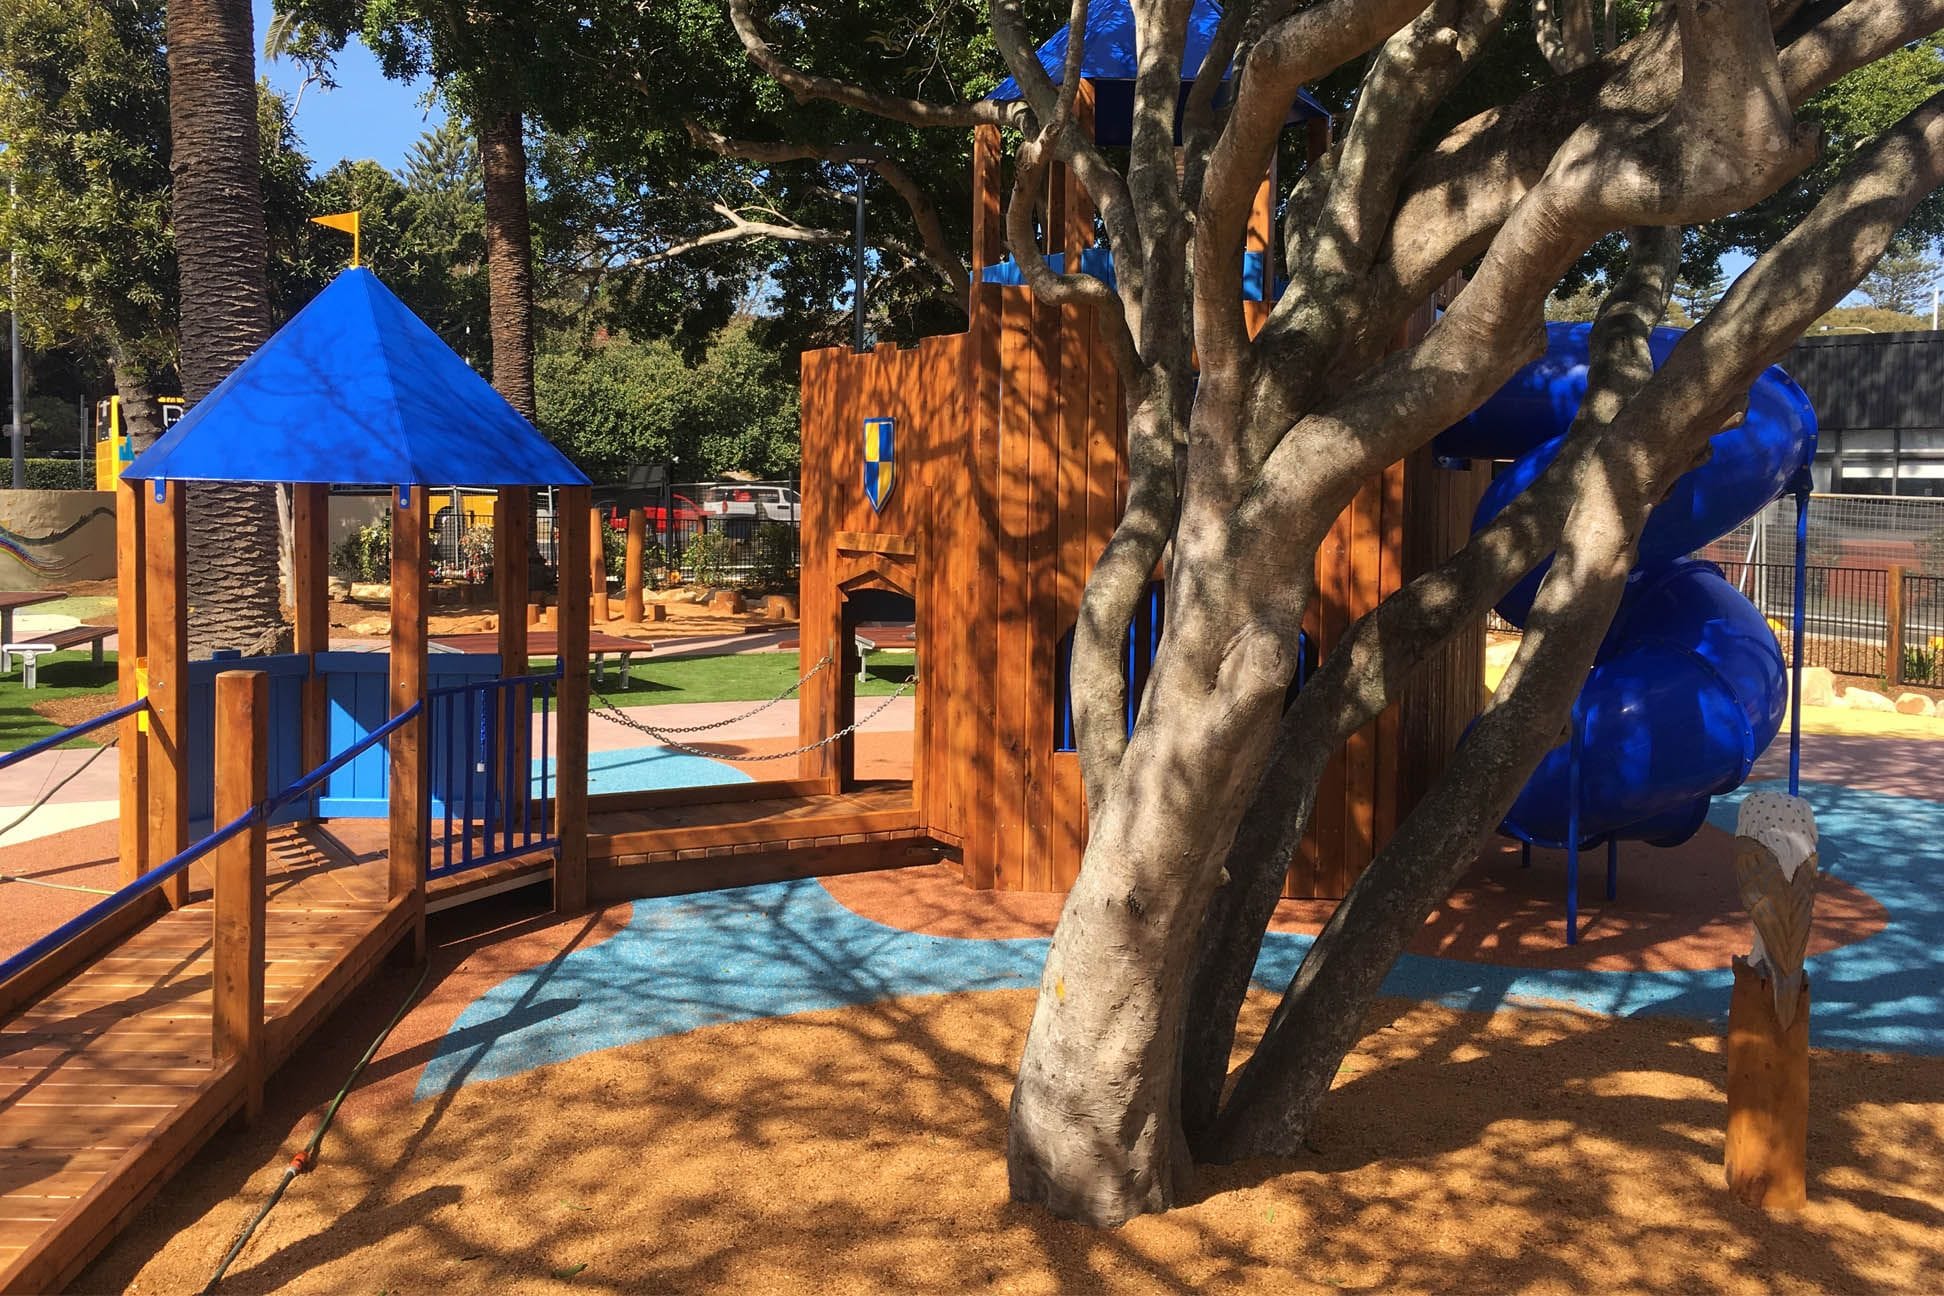 Narrabeen Tram Shed Playground by Wetpour Image -5ba9b421d4f39